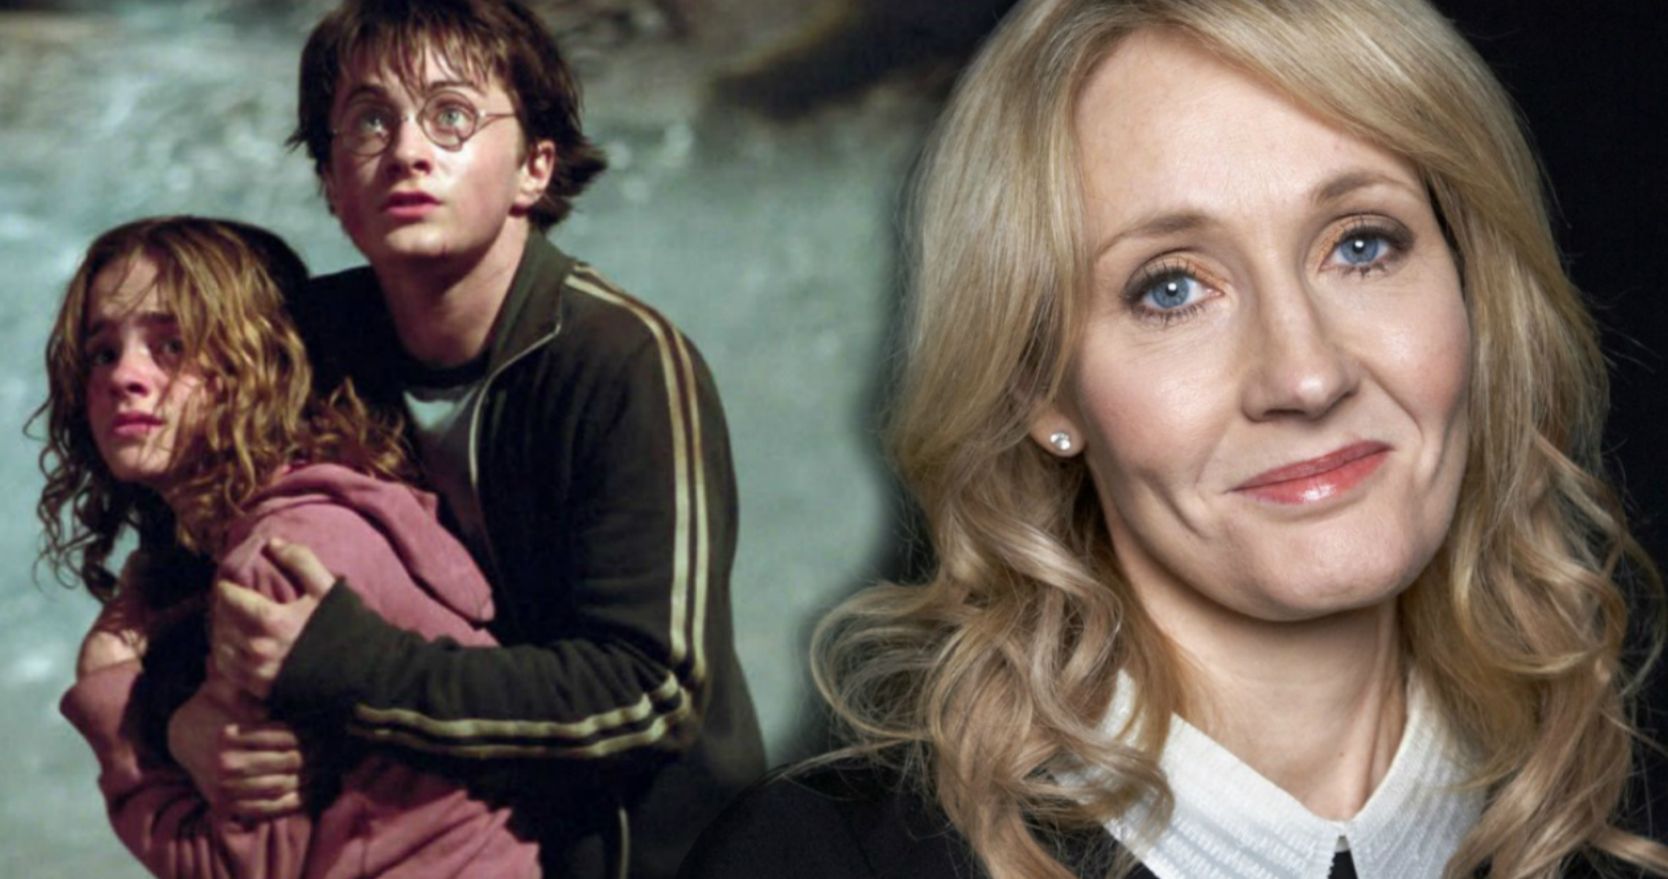 Harry Potter Creator Shares Past Abuse in Defending Stance on Transgender Issues